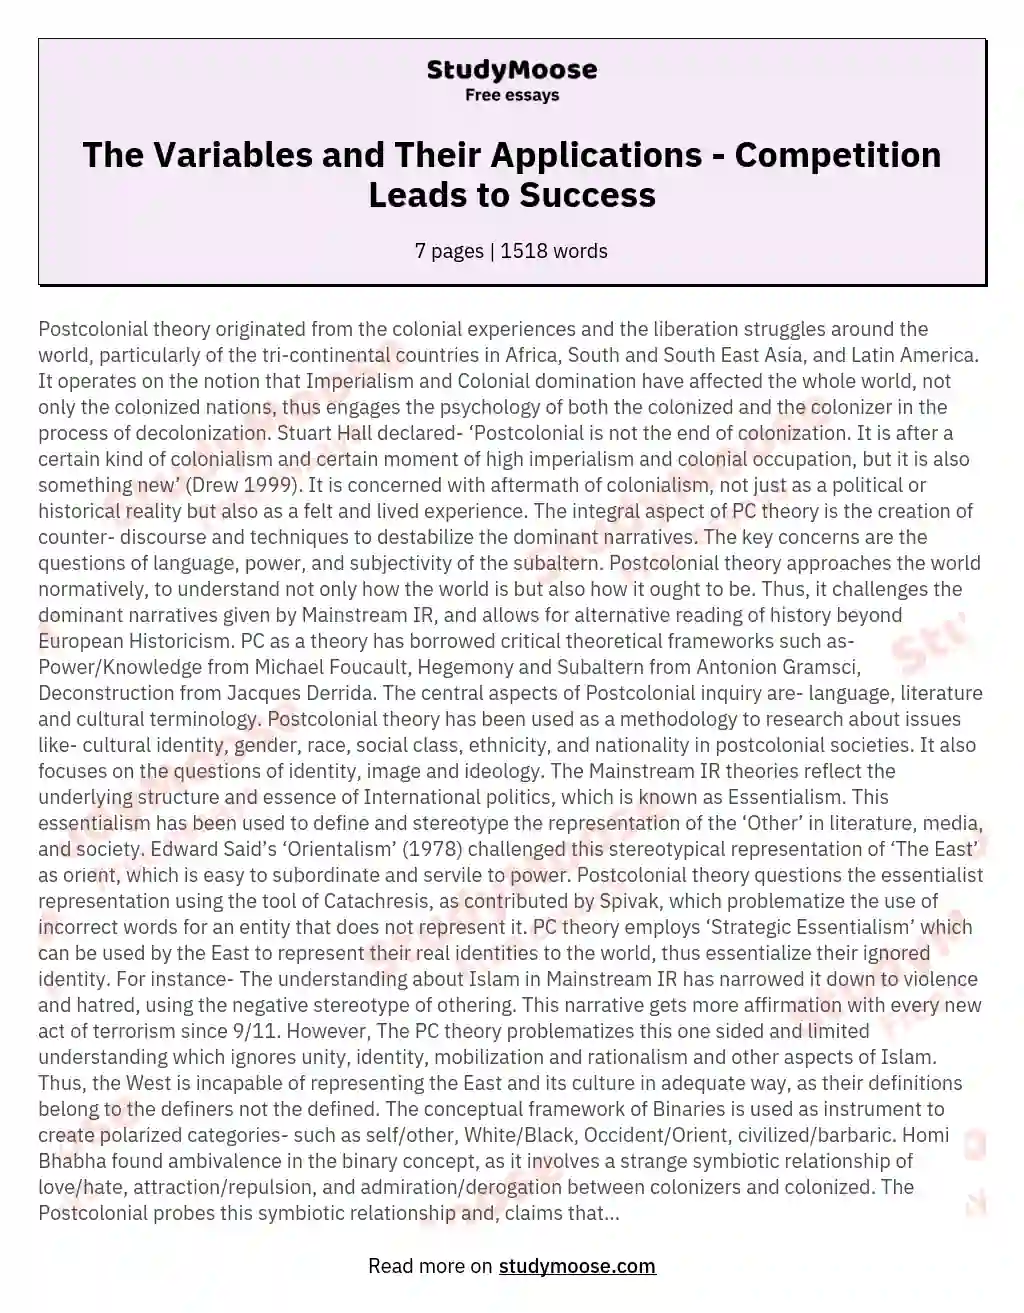 The Variables and Their Applications - Competition Leads to Success essay